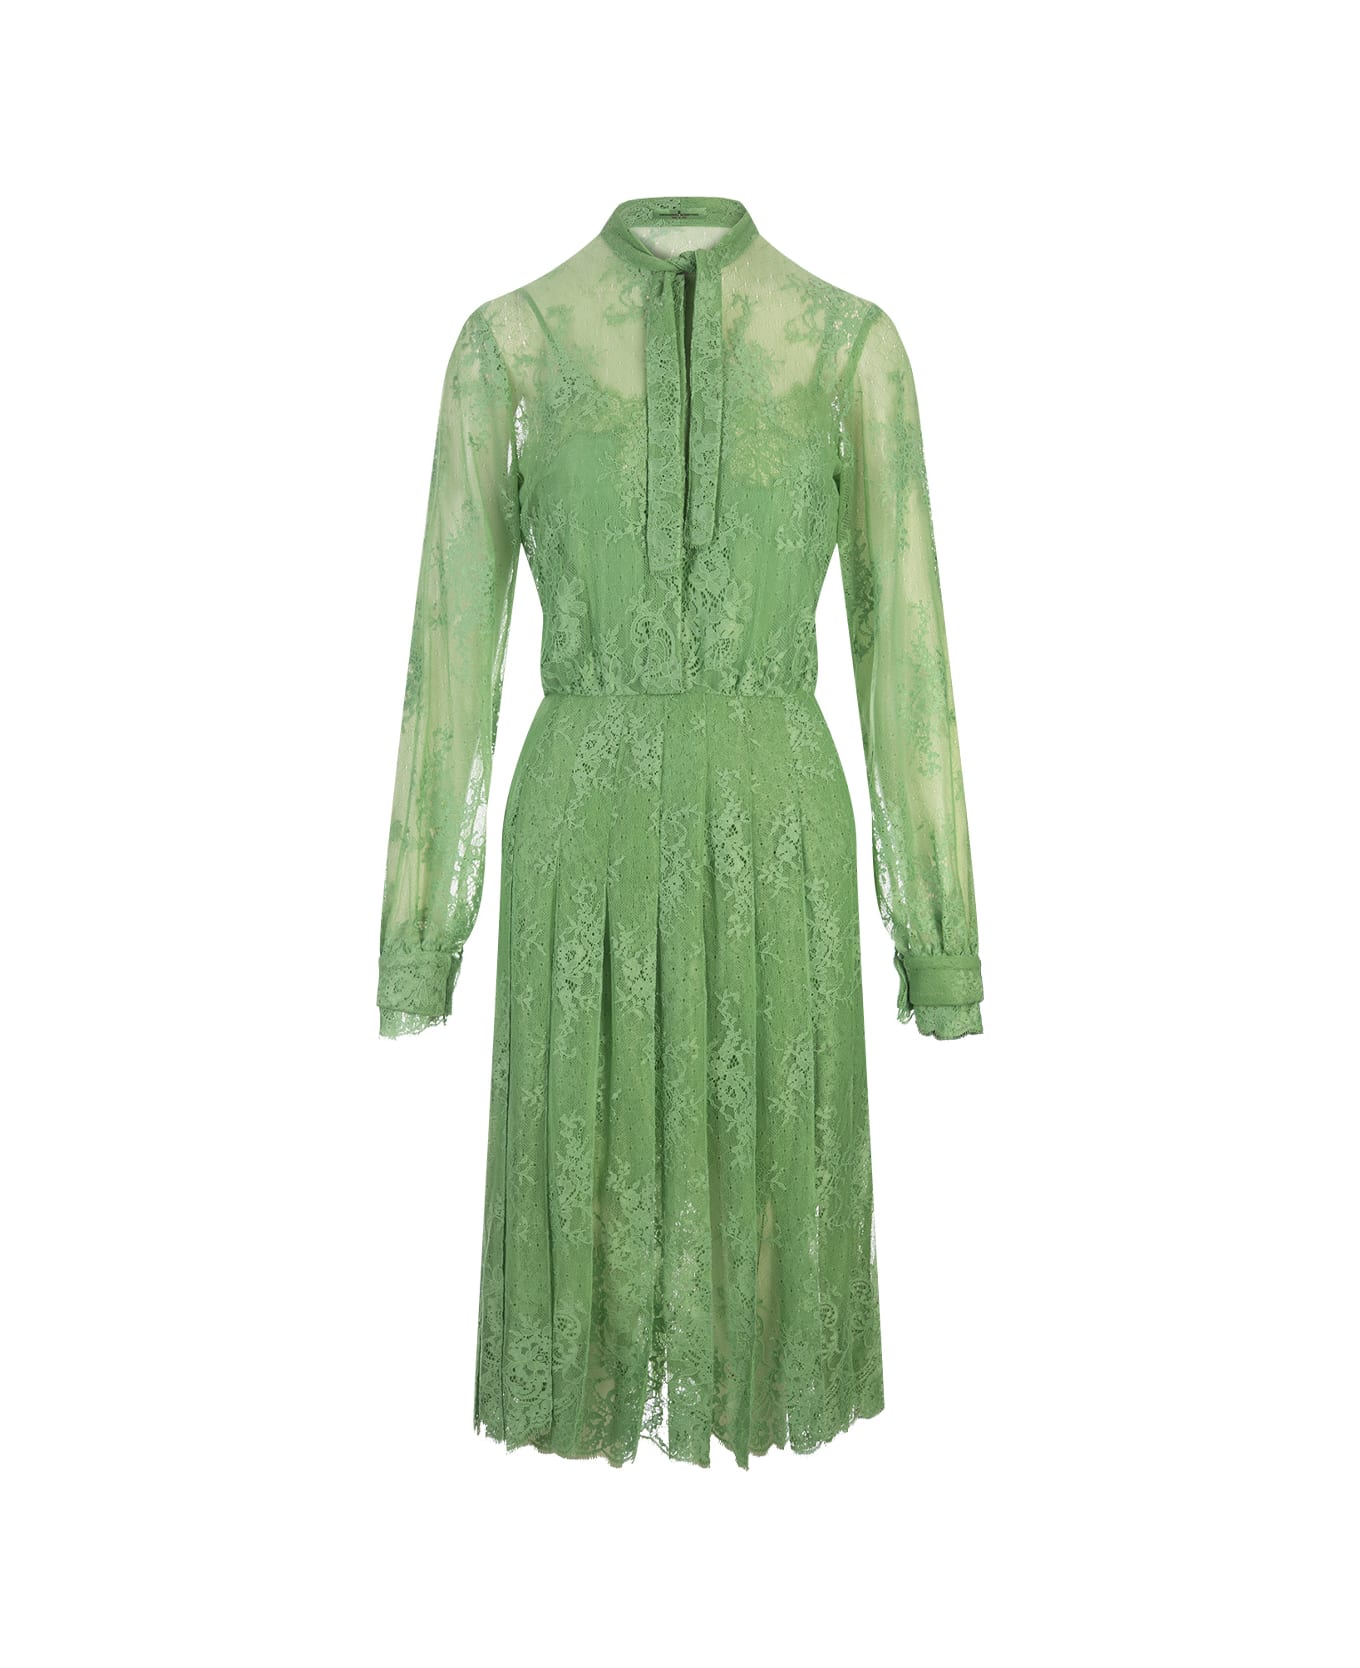 Ermanno Scervino Green Lace Dress With Long Sleeve And Collar Bow - Green ワンピース＆ドレス